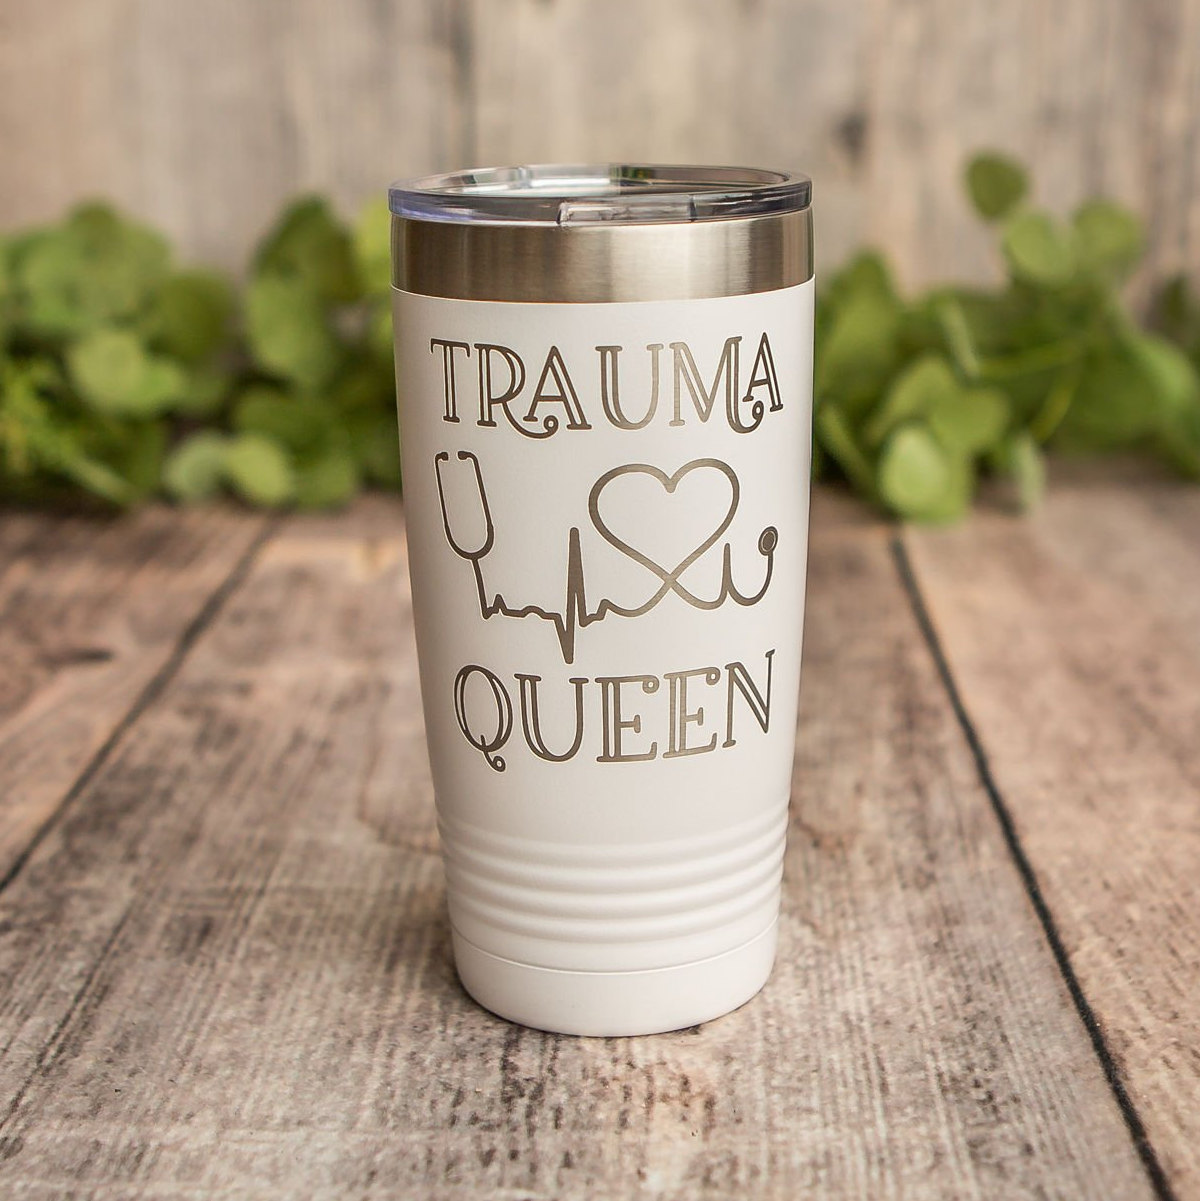 https://3cetching.com/wp-content/uploads/2020/09/trauma-queen-engraved-stainless-steel-tumbler-yeti-style-cup-trauma-nurse-gift-5f5fb69f.jpg